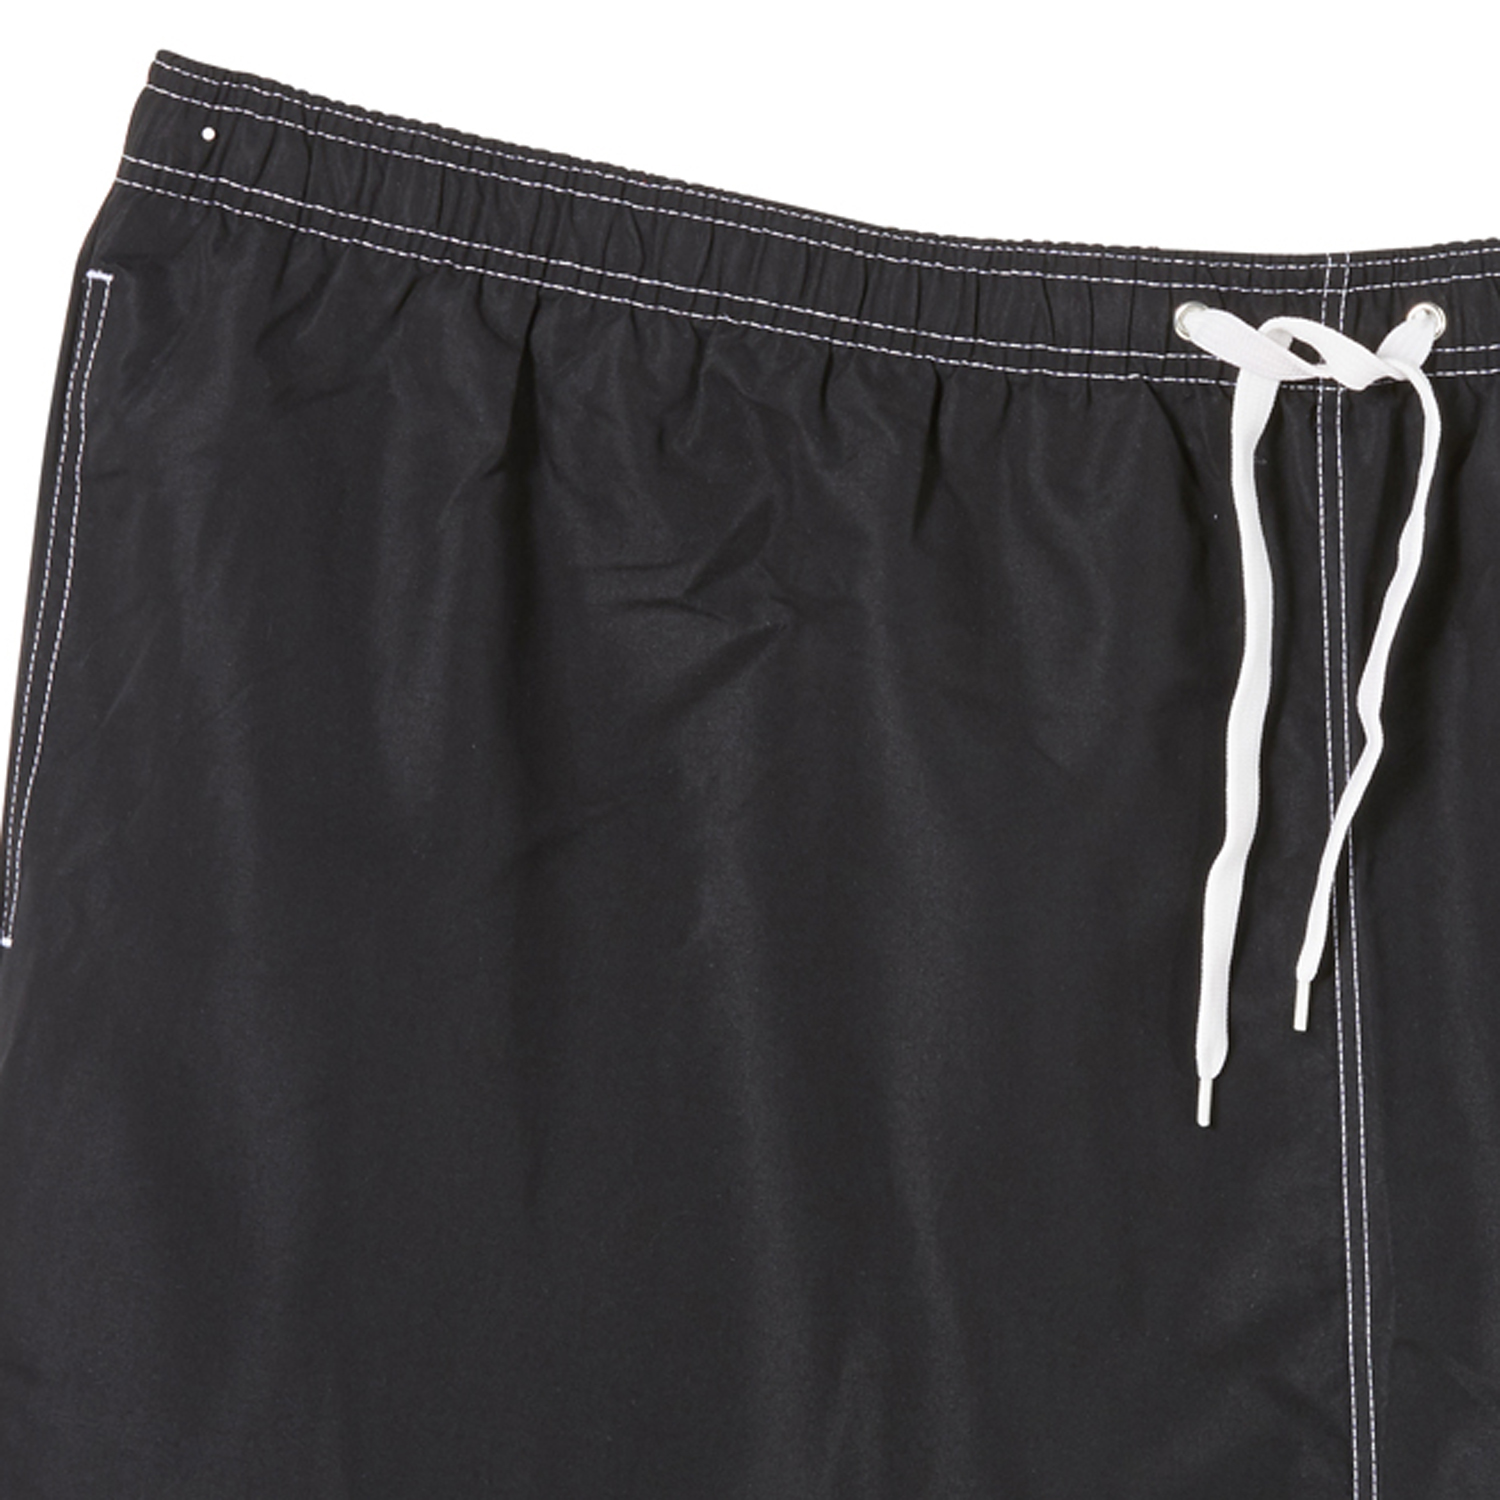 Swim shorts by eleMar for men black in oversizes up to 10XL